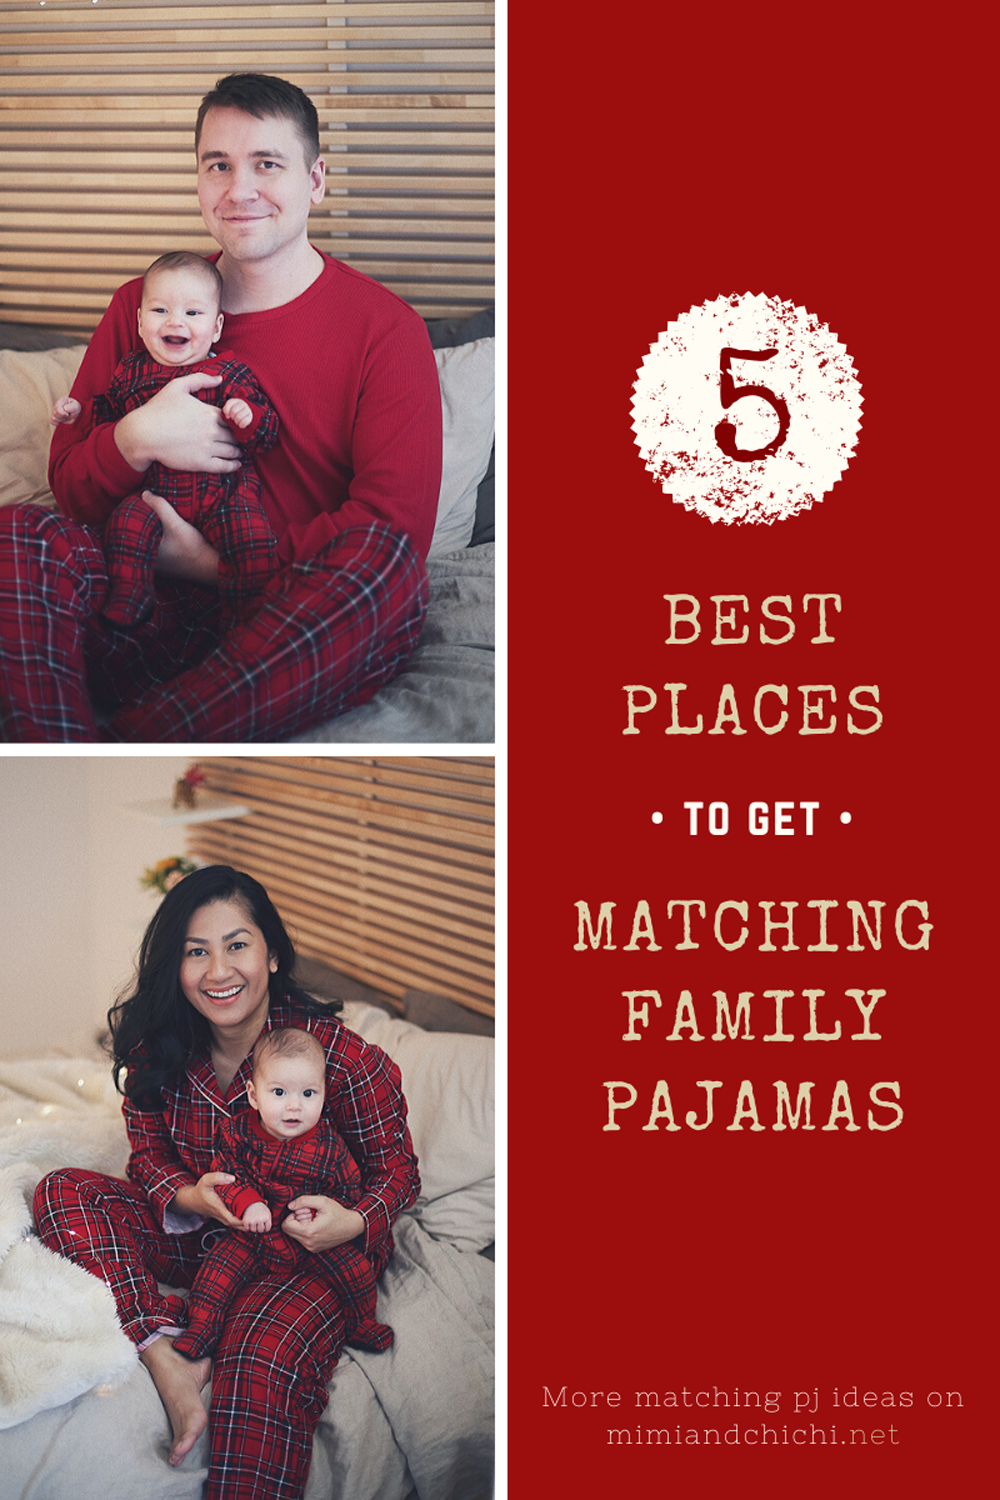 Here are the five best best places to get matching family pajamas #matchingpajamas #holidayphotoideas #holidaytradition #pajamaparty